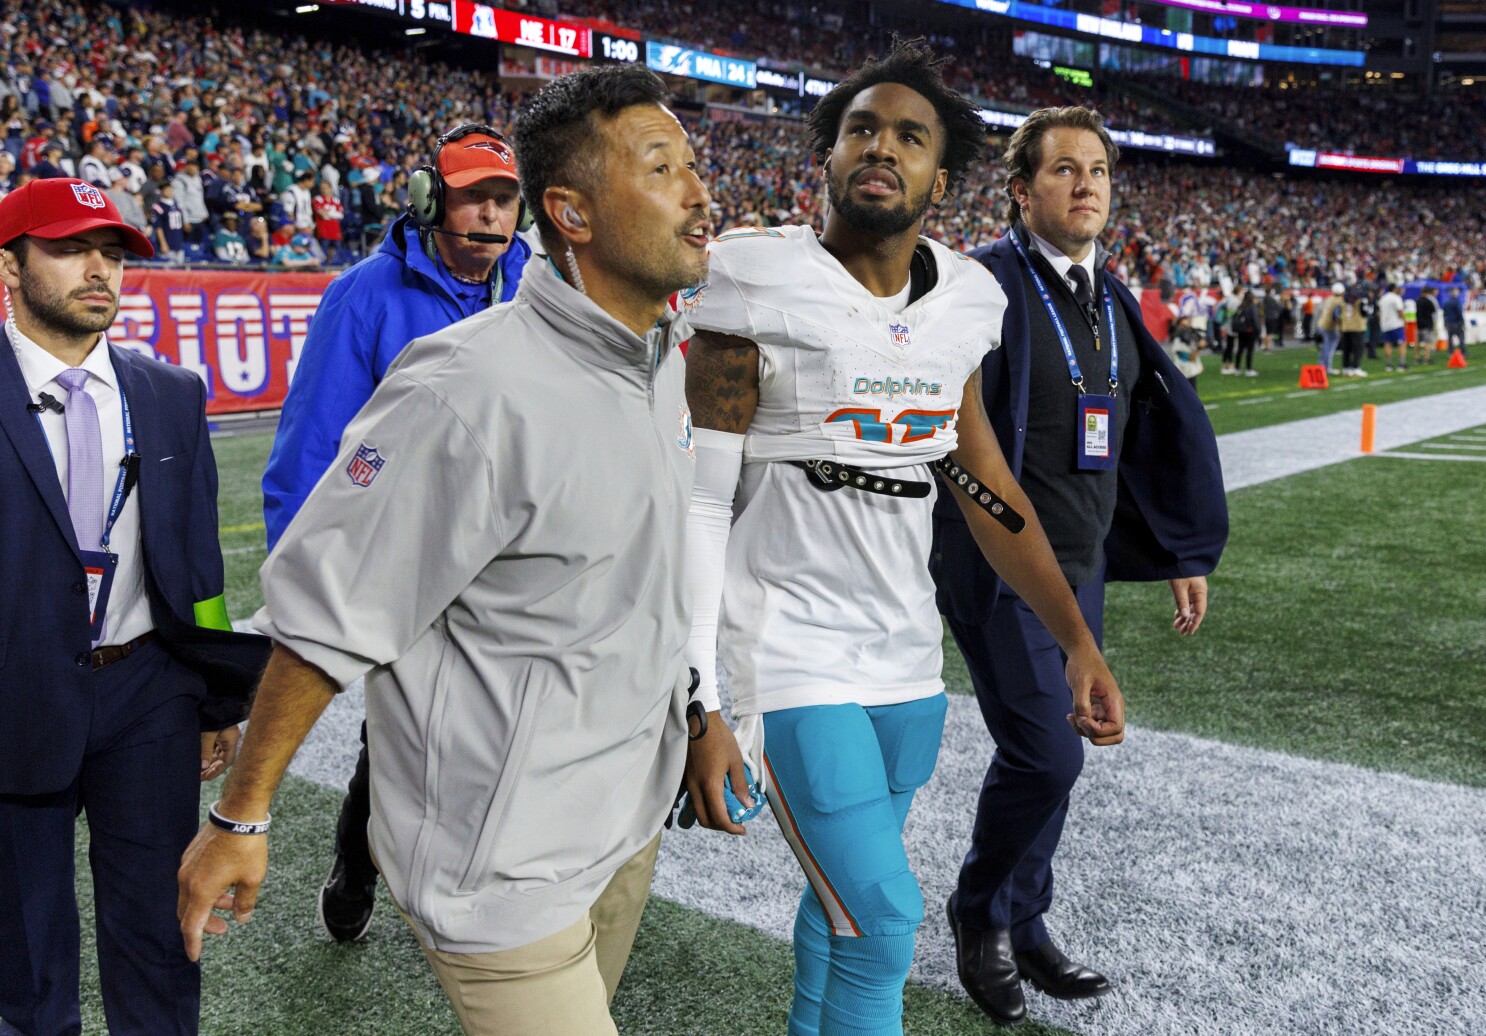 Dolphins receiver Jaylen Waddle ruled out of Sunday's game vs